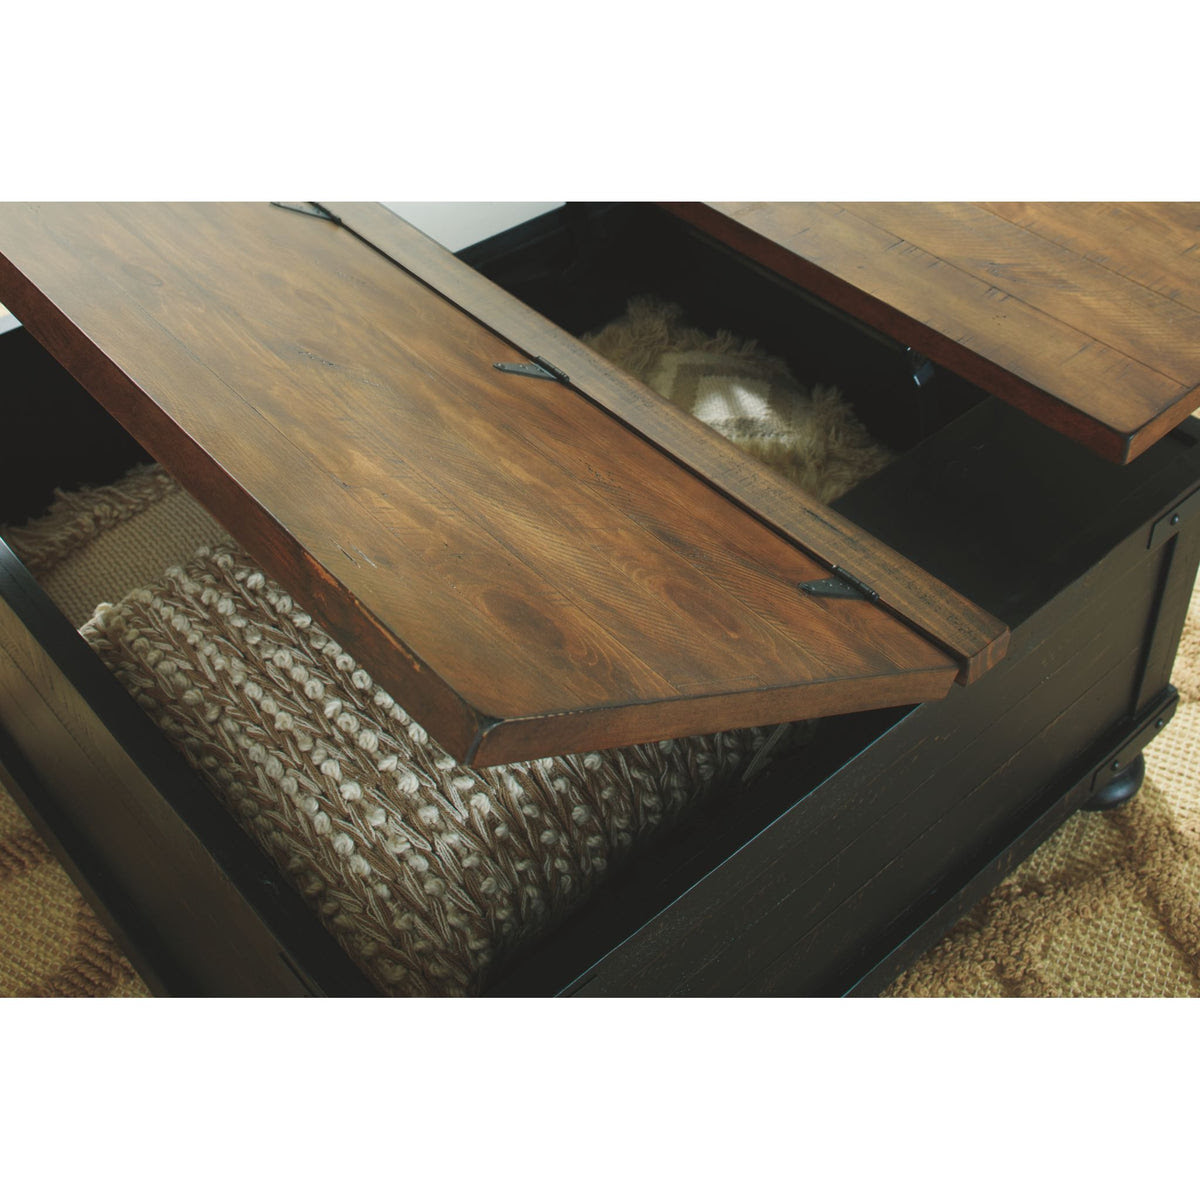 The top lifts up to reveal hidden storage, pulling toward you for the perfect surface to type on your laptop or eat in front. Valebeck Cocktail Table With Lift Top Ashley Homestore Canada